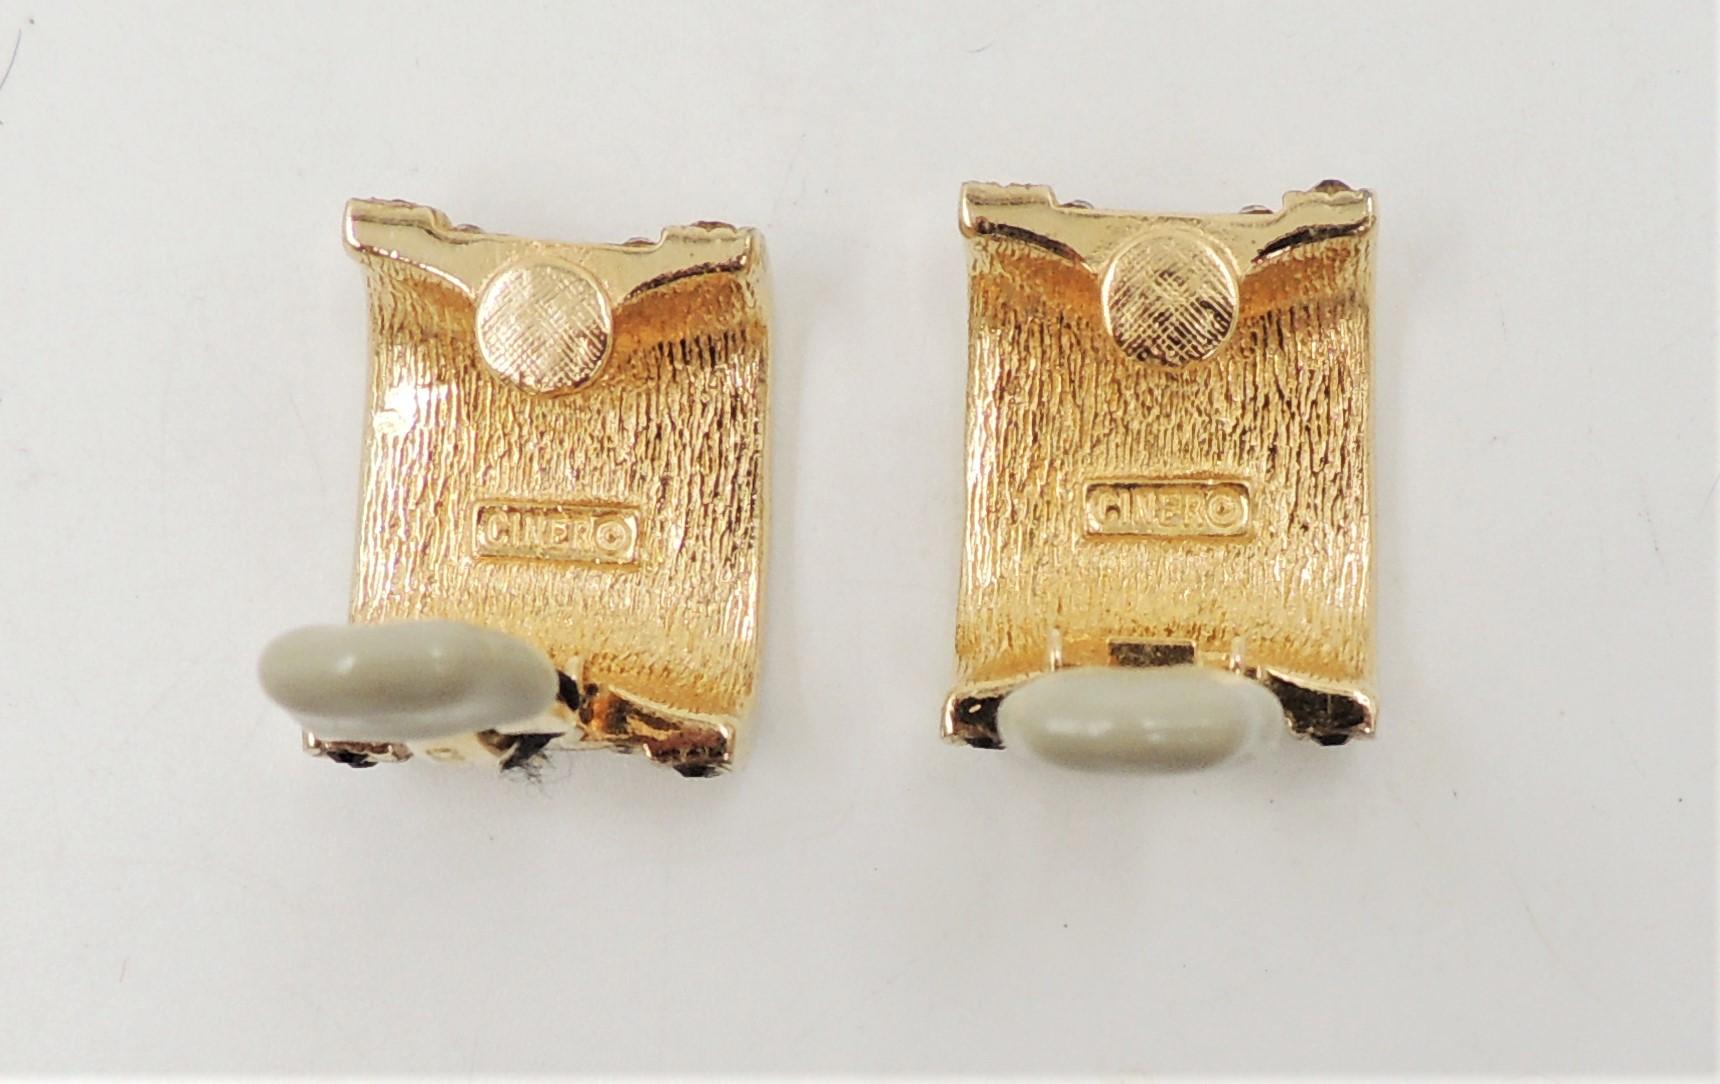 Vintage 1980s Signed Ciner Goldtone Faux-Onyx & Clear Rhinestone Earrings In Excellent Condition For Sale In Easton, PA